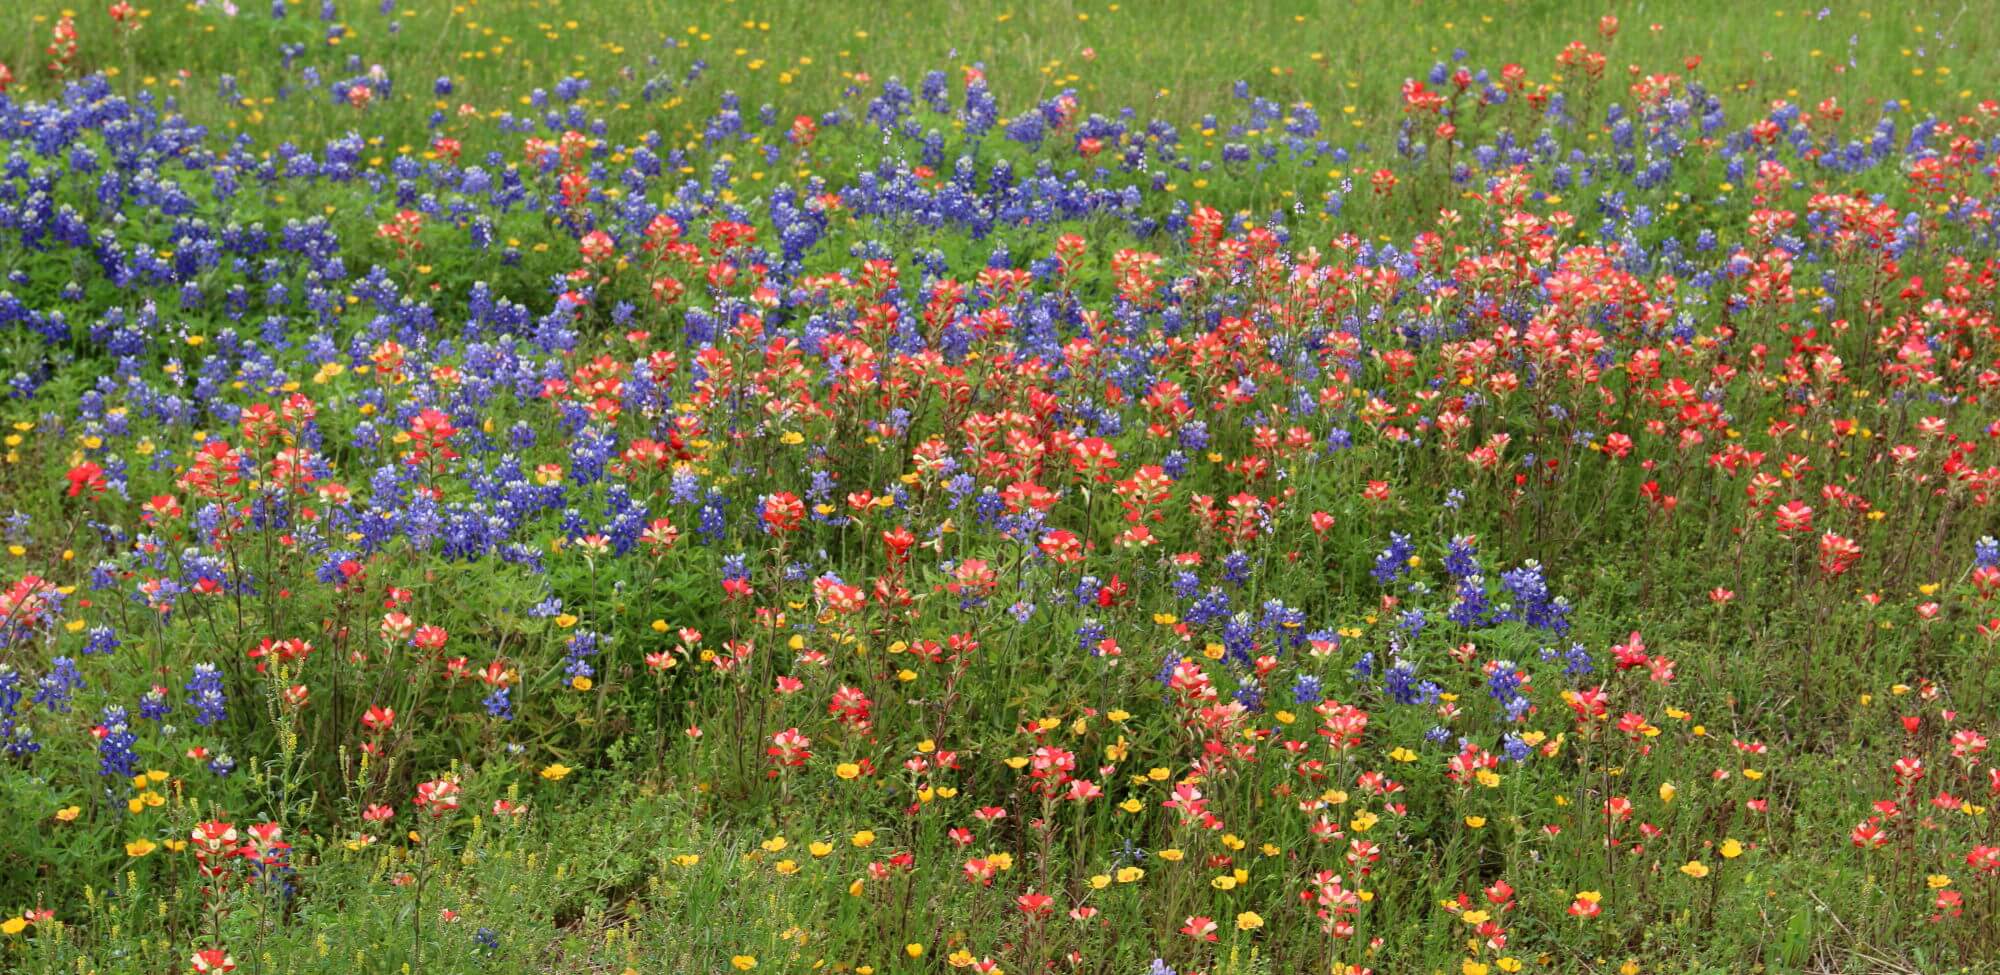 The wildflowers in Texas are nothing short of spectacular. Photo by Bruce Beehler.